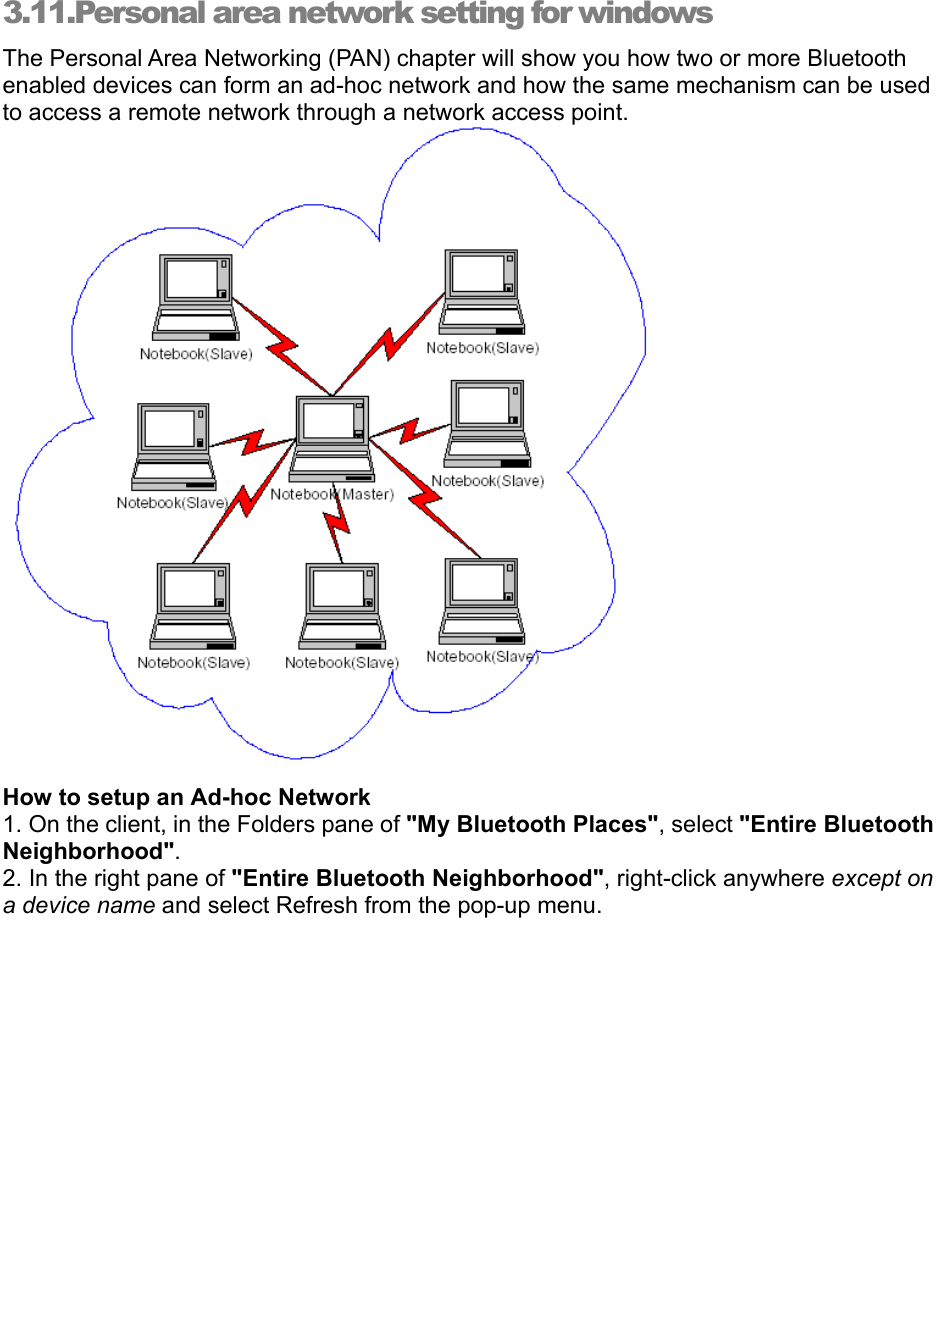   3.11.Personal area network setting for windows   The Personal Area Networking (PAN) chapter will show you how two or more Bluetooth enabled devices can form an ad-hoc network and how the same mechanism can be used to access a remote network through a network access point.   How to setup an Ad-hoc Network 1. On the client, in the Folders pane of &quot;My Bluetooth Places&quot;, select &quot;Entire Bluetooth Neighborhood&quot;. 2. In the right pane of &quot;Entire Bluetooth Neighborhood&quot;, right-click anywhere except on a device name and select Refresh from the pop-up menu. 